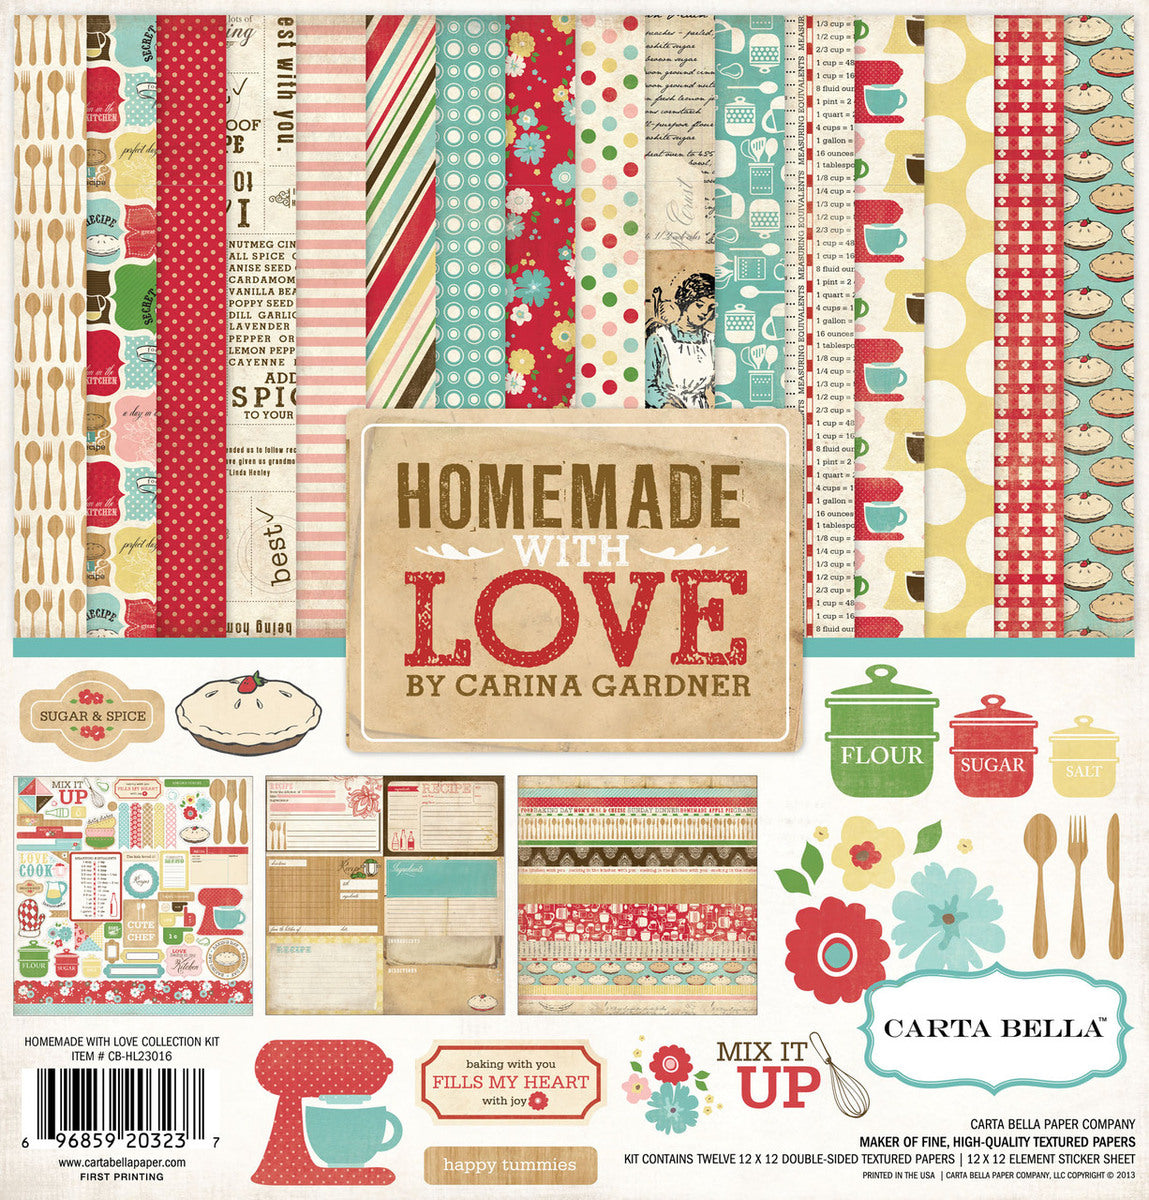 Homemade With Love 12x12 collection kit from Carta Bella Paper